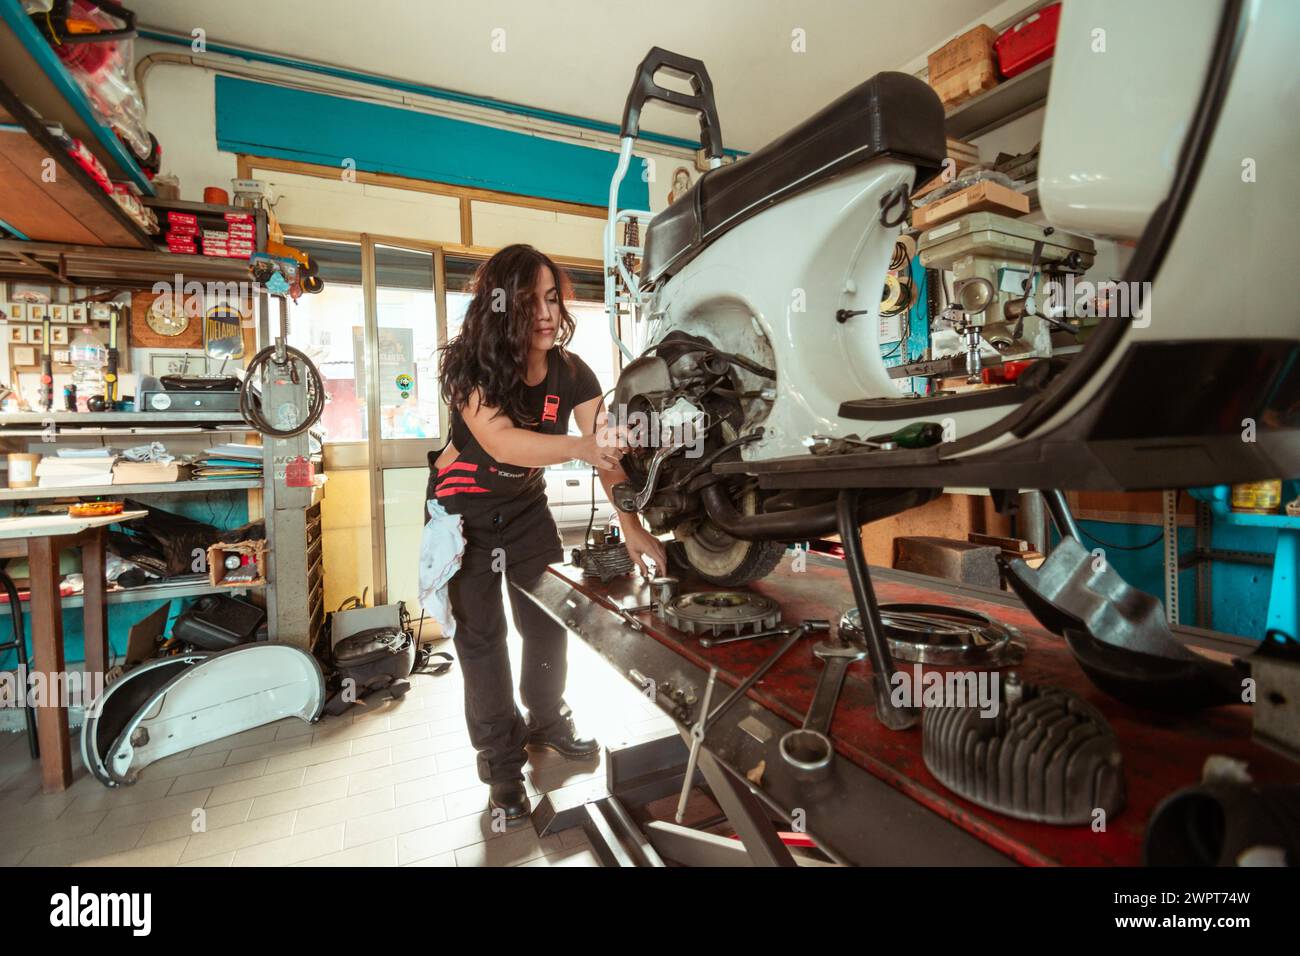 A woman mechanic works on a vintage scooter in a cluttered workshop, wearing black overall and shirt, latino female in traditional masculine jobs Stock Photo